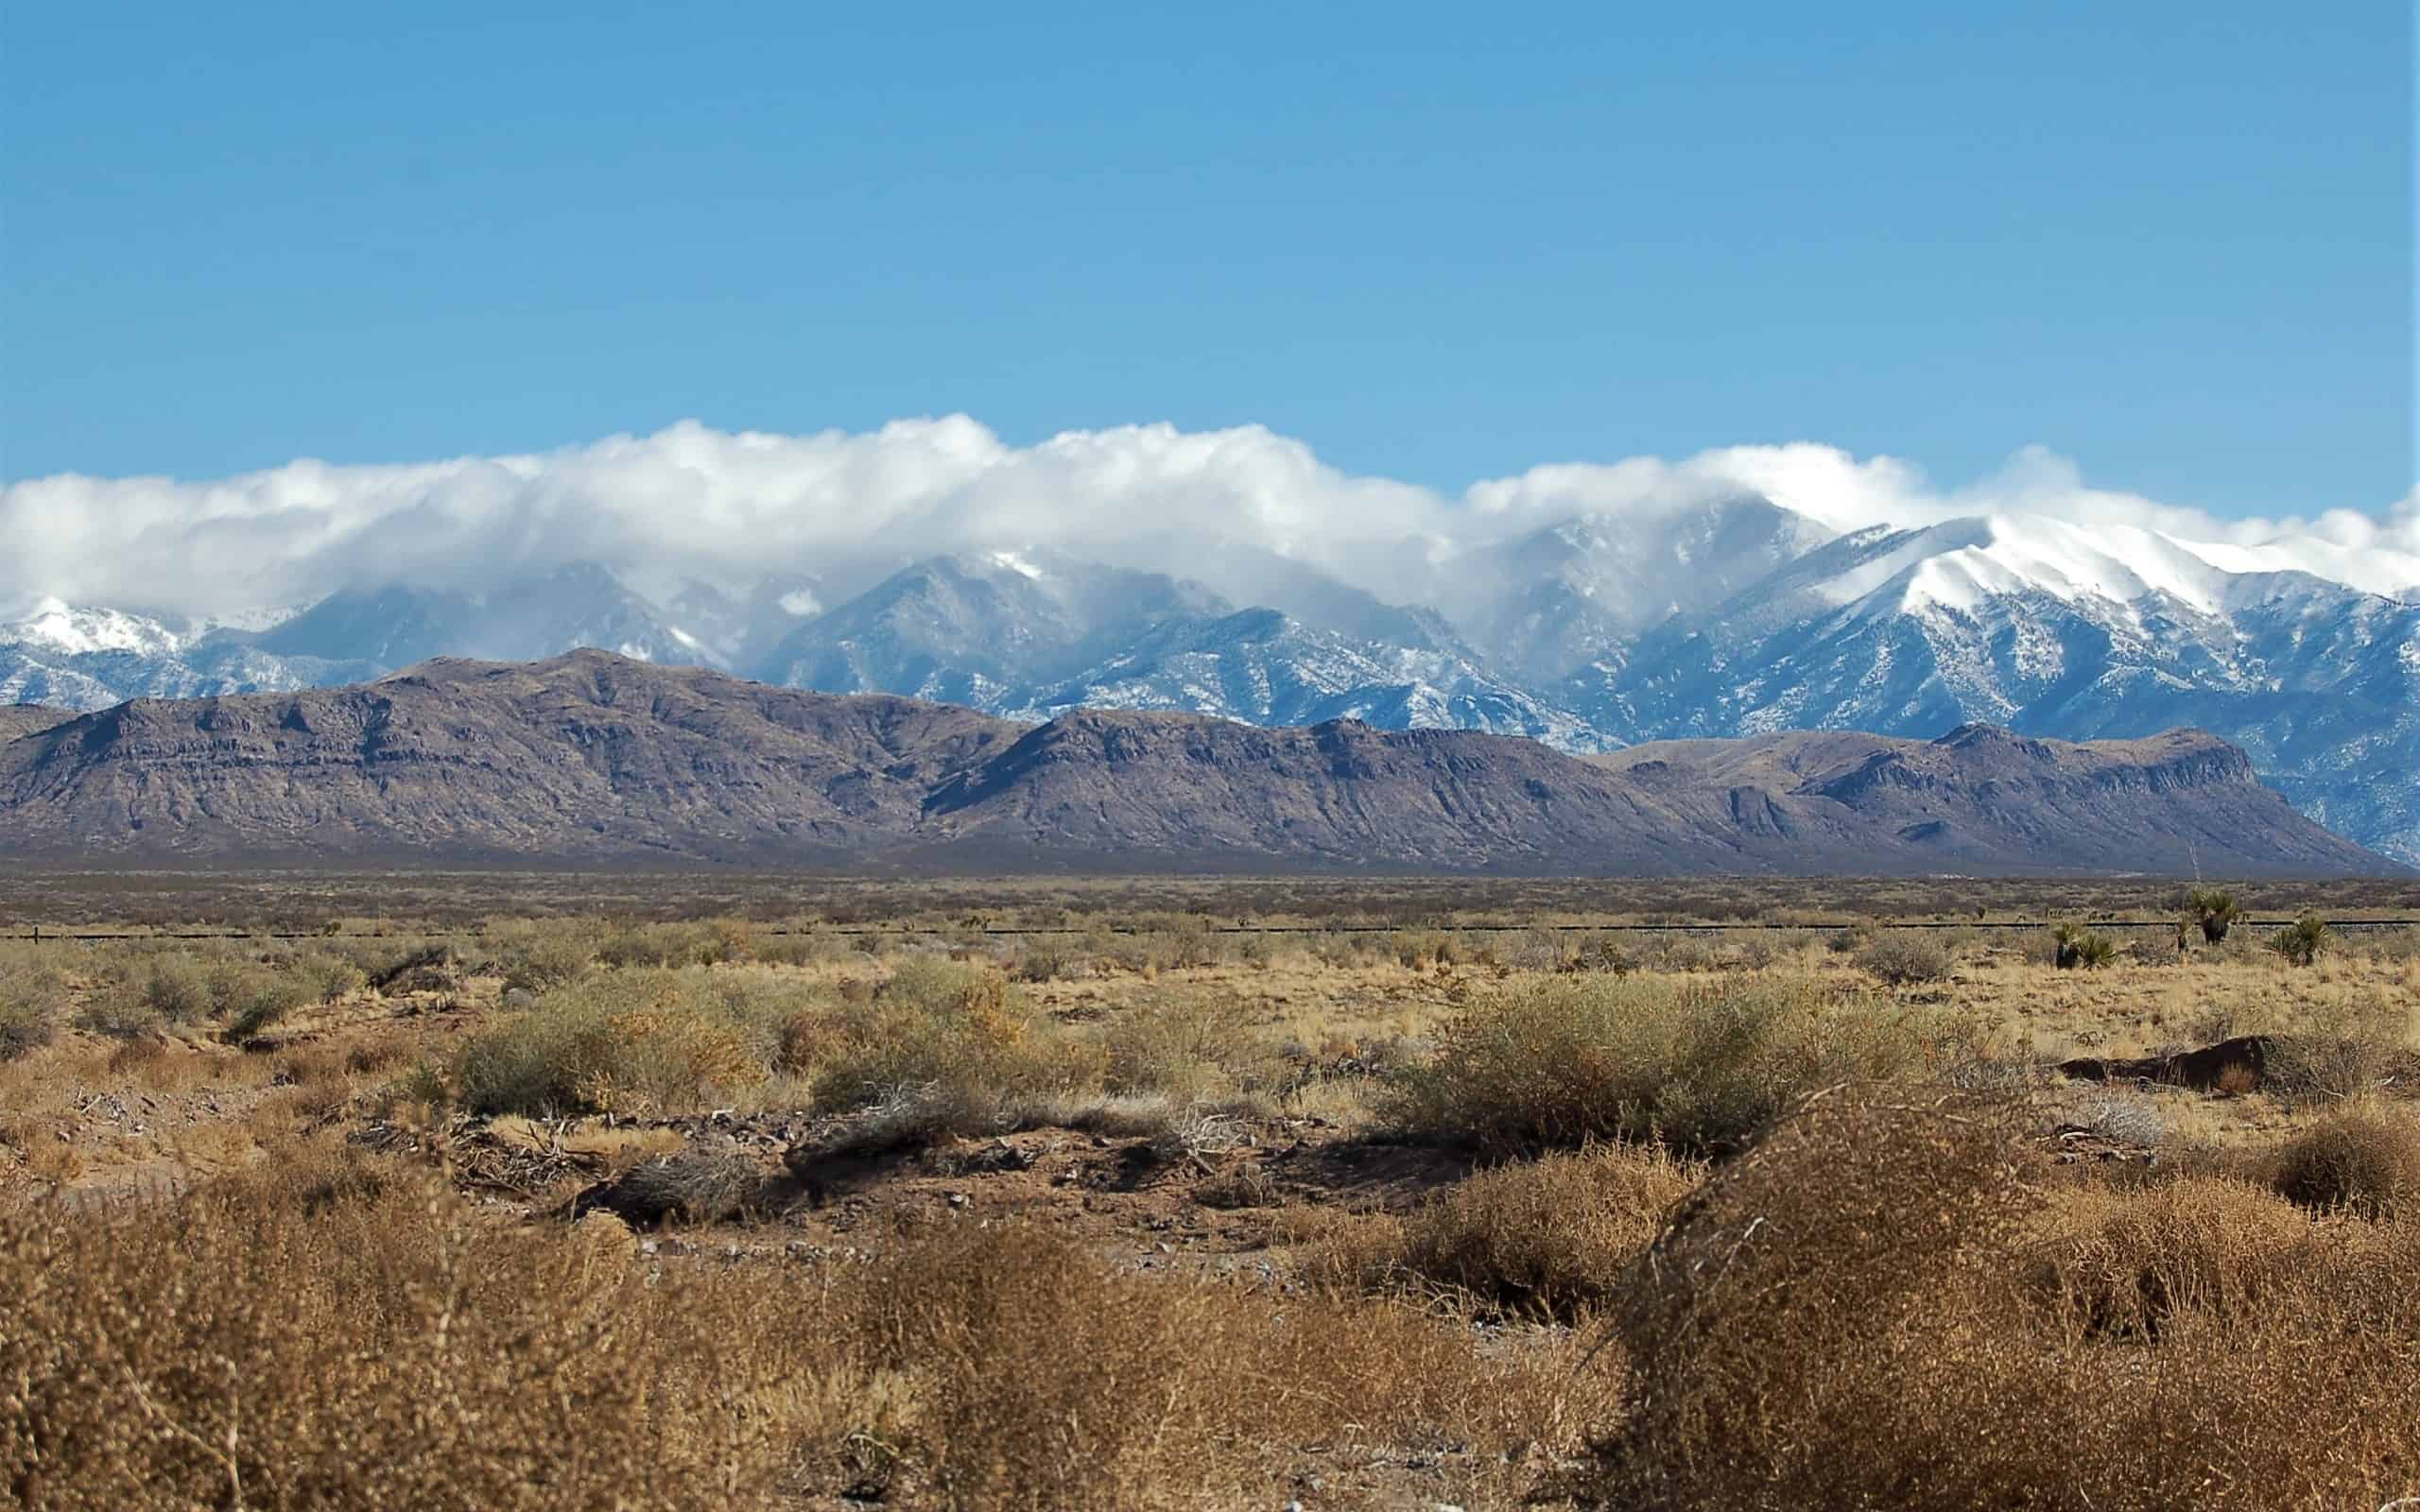 The Sacramento Mountains in New Mexico act as a sky island with its own endemic species.